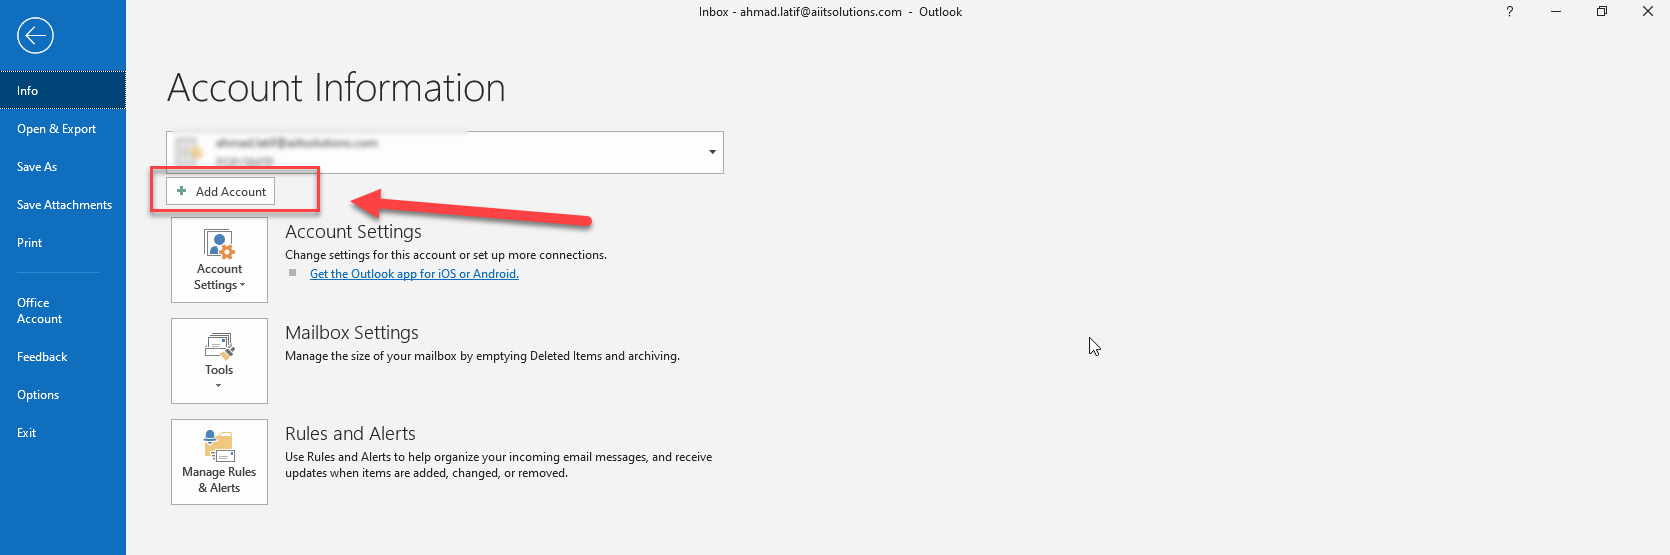 setup zoho mail in outlook 365